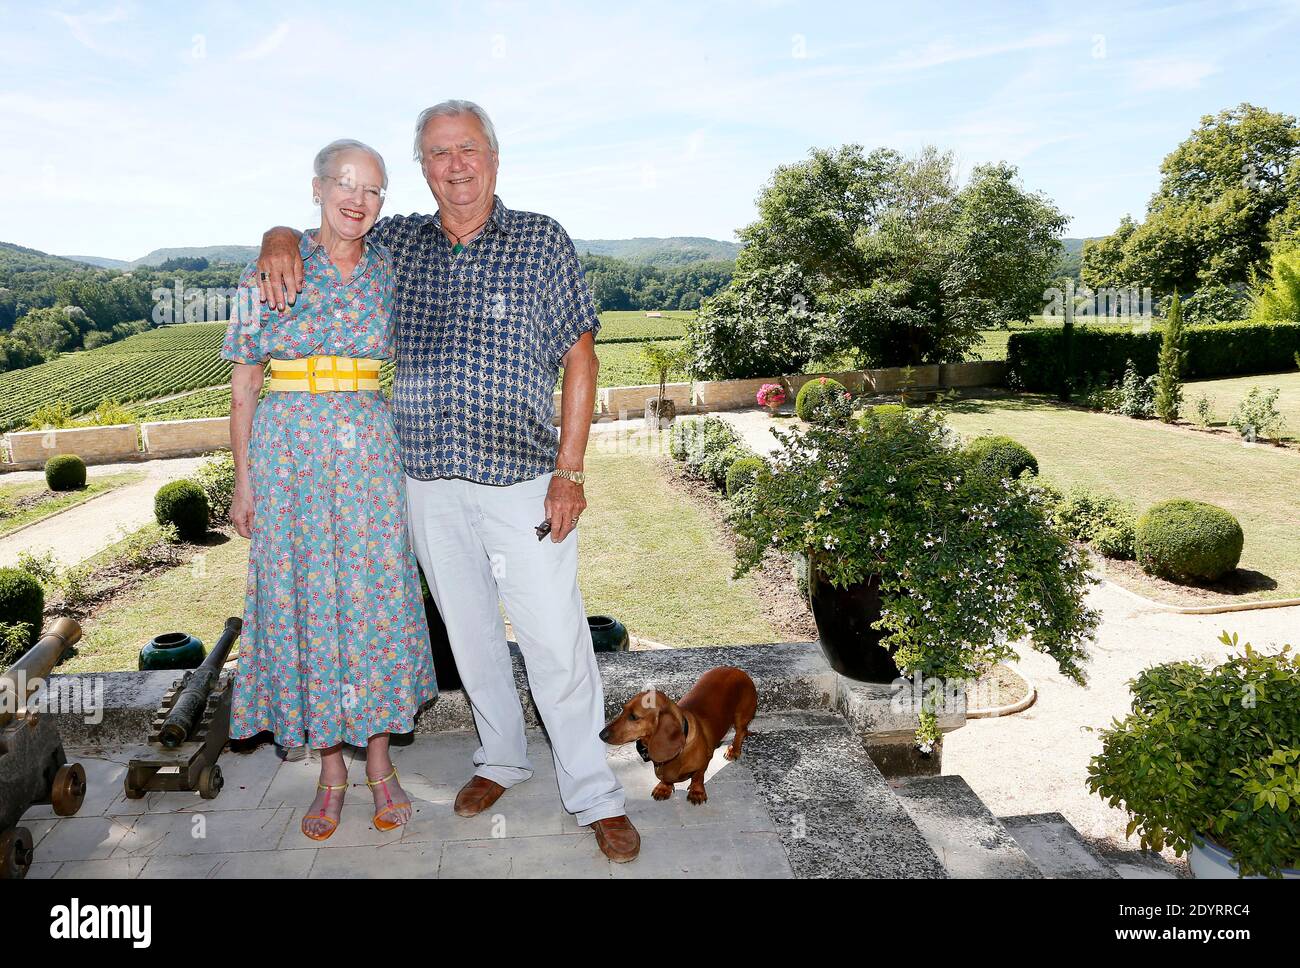 NO WEB/NO APPS/NO TABLOIDS - SPECIAL FEE REQUIRED - Exclusive. Queen Margrethe II and Prince Consort Henrik of Denmark spend their annual summer vacation at Chateau de Caix, near Cahors, southwestern France on August 14, 2013. The 25-hectare family estate produces about 160,000 bottles of 'Cahors' red, white and rose wine. Prince Henrik prefers red wine (because the grapes are hand-picked), which represents 70% of the castle's production. Best-selling around the world are the 2002 to 2005 vintages called 'La Cuvee du Prince du Danemark, Chateau de Caix, Cahors'. 10% of the Prince's wine are so Stock Photo